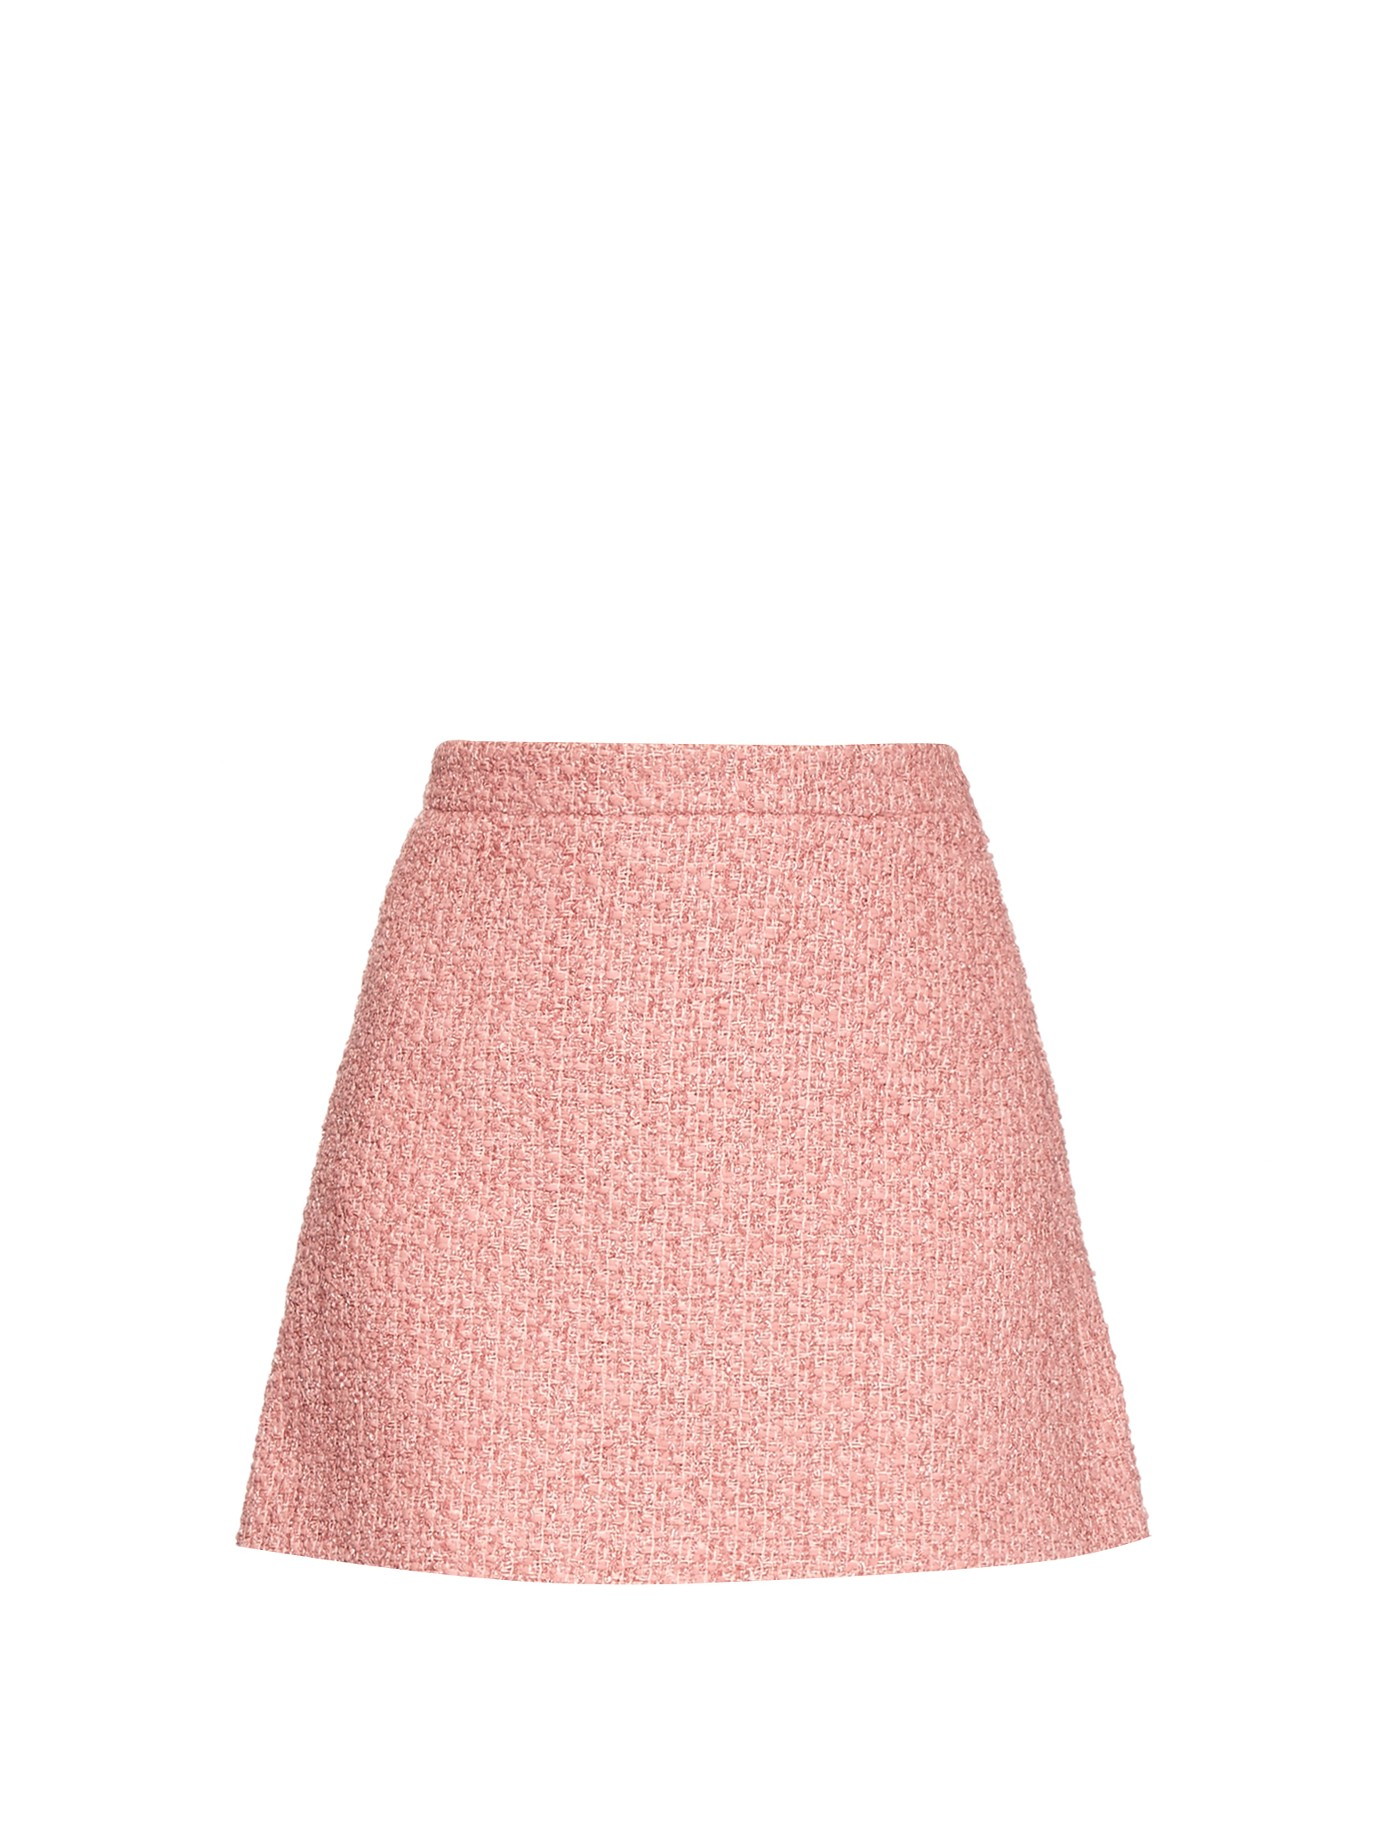 Lyst - Gucci Tweed A-line Mini Skirt in Pink